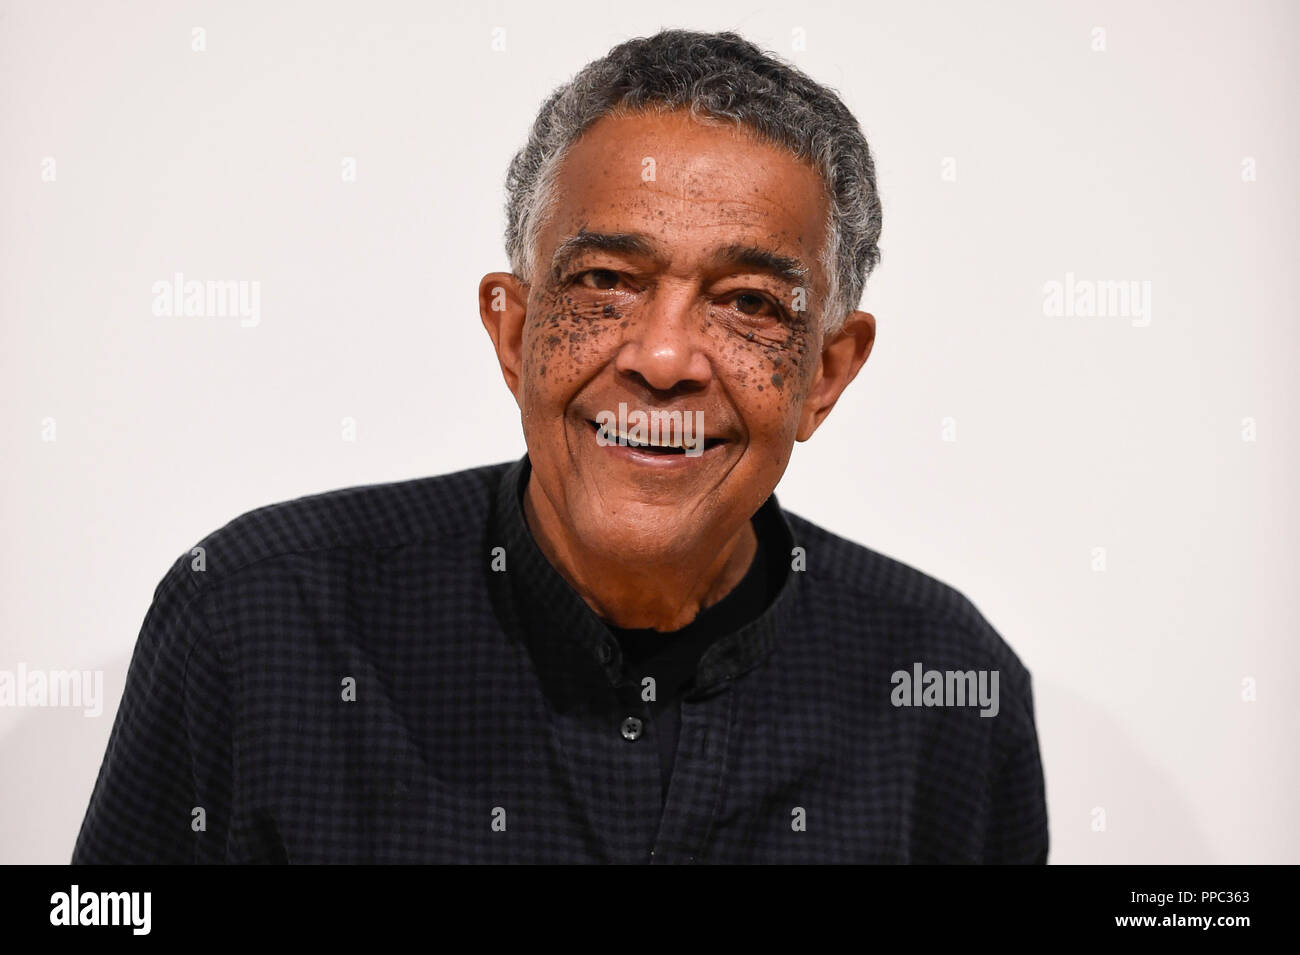 London, UK.  25 September 2018.  Artist Fred Eversley poses at the preview of 'Space Shifters' at the Hayward Gallery, an exhibition which features artworks by 20 leading international artists that disrupt the visitor’s sense of space and alter their perception of their surroundings.  The show runs 26 September to 6 January 2019. Credit: Stephen Chung / Alamy Live News Stock Photo